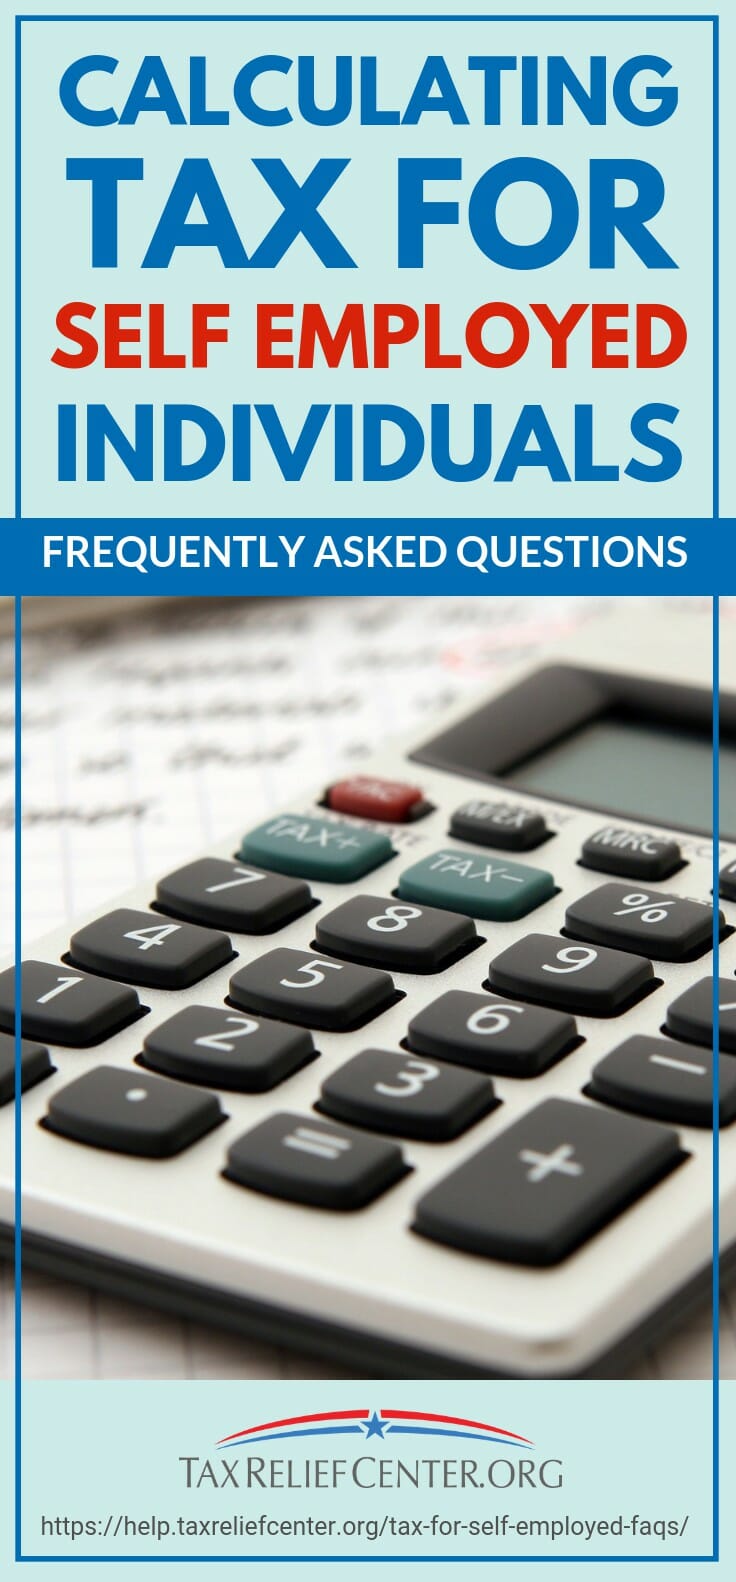 Calculating Tax For Self Employed Individuals | Frequently Asked Questions https://help.taxreliefcenter.org/tax-for-self-employed-faqs/